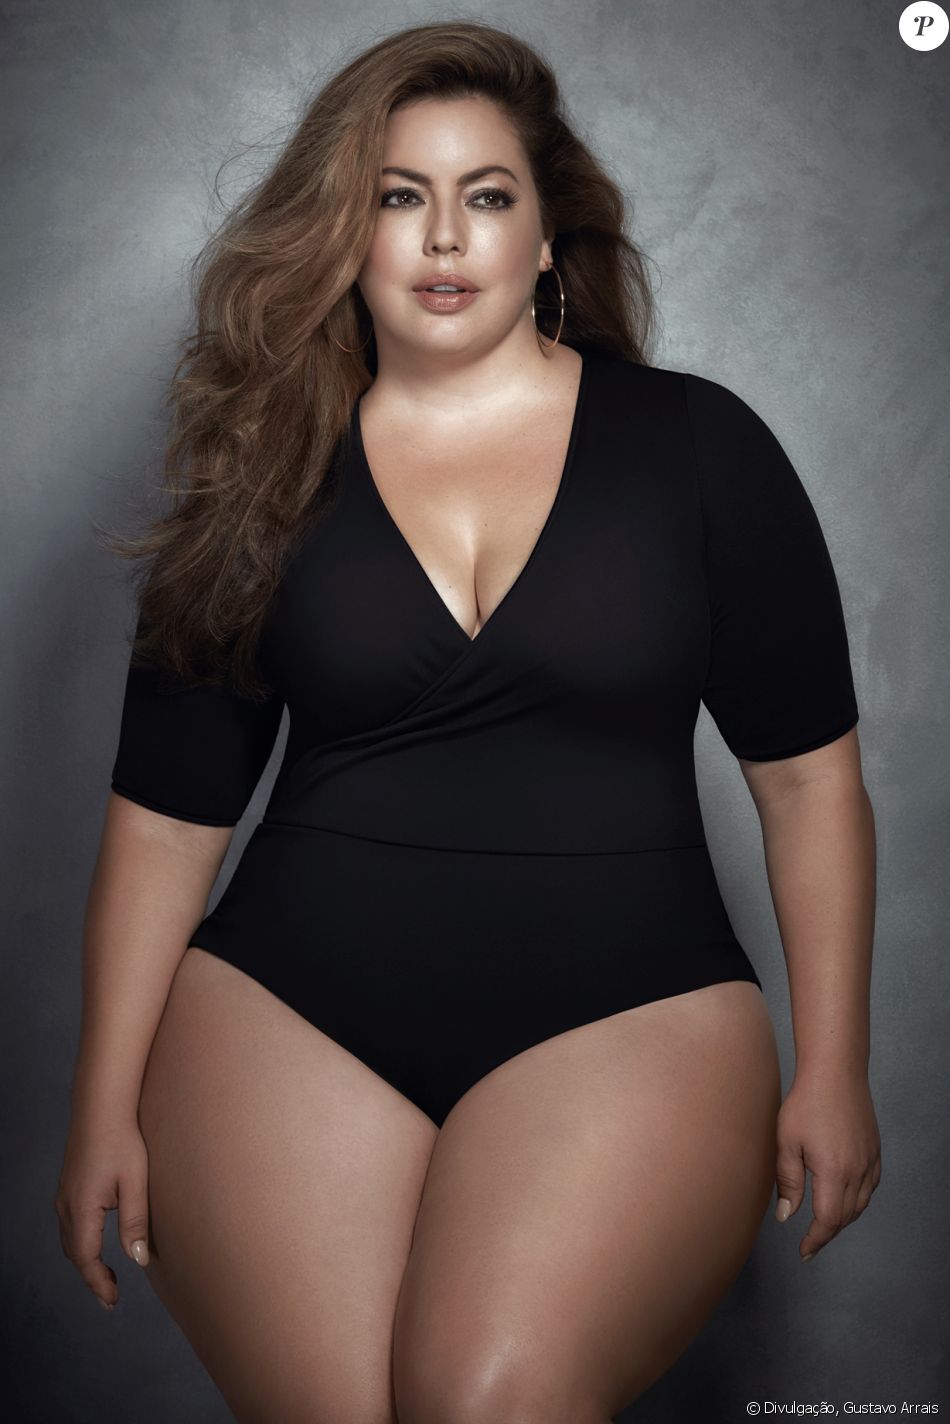 The Top 15 Hot Plus Size Models of the World - Blogrope.